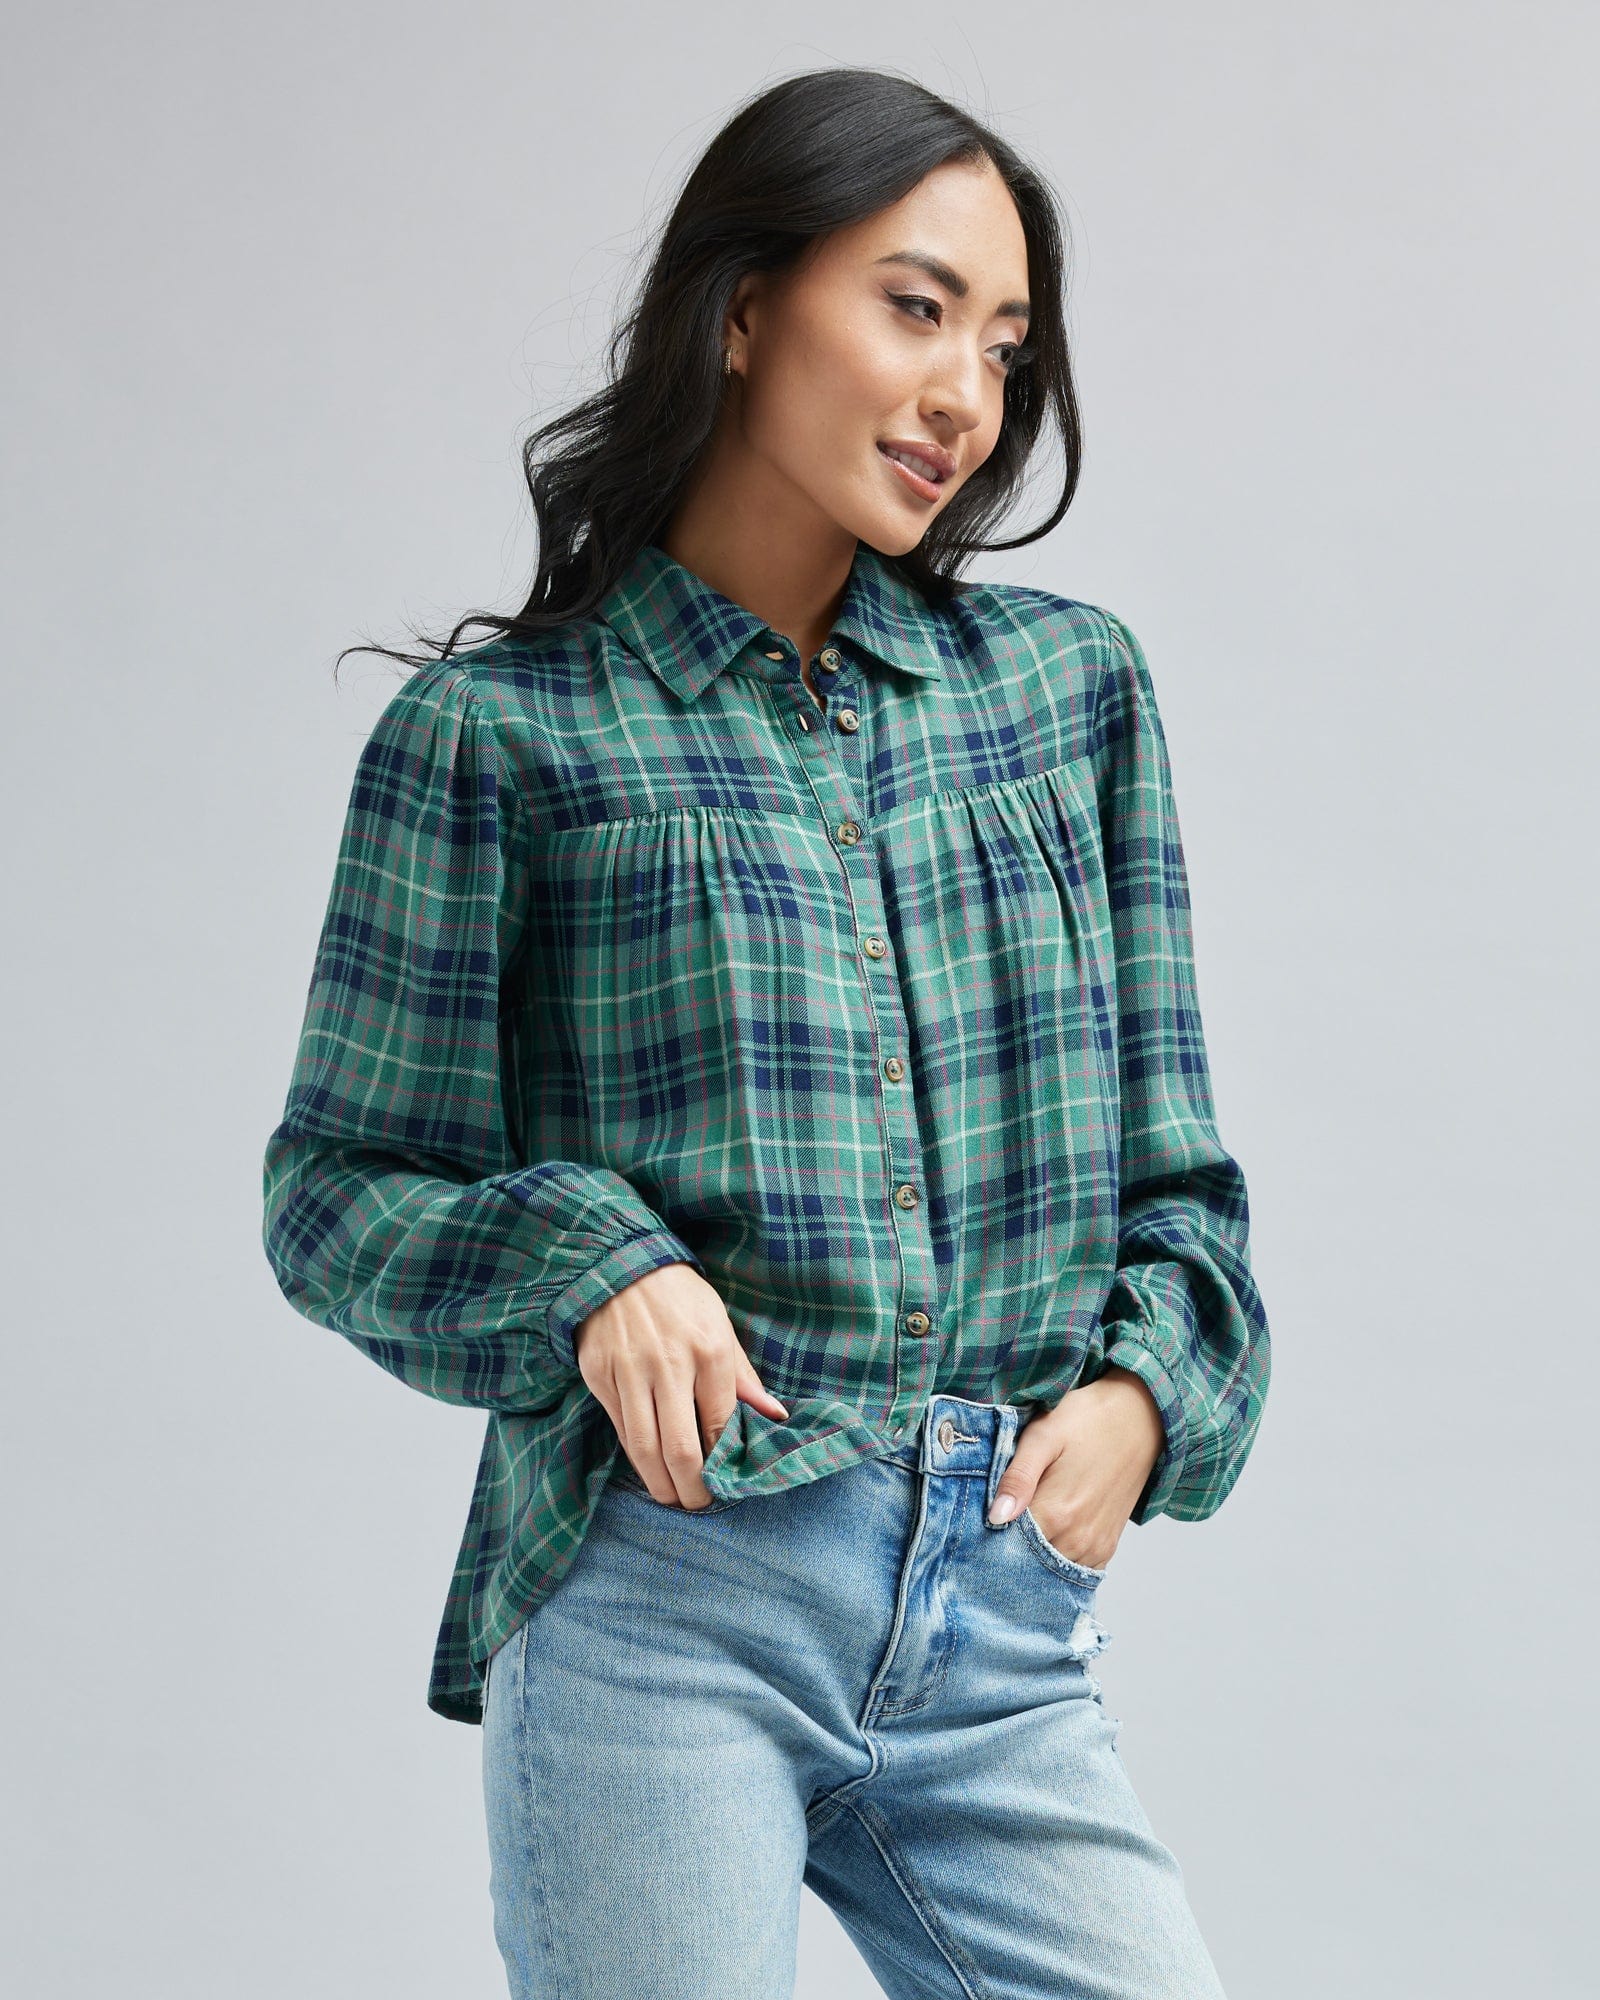 Woman in a collared, blue and green plaid, long sleeve blouse